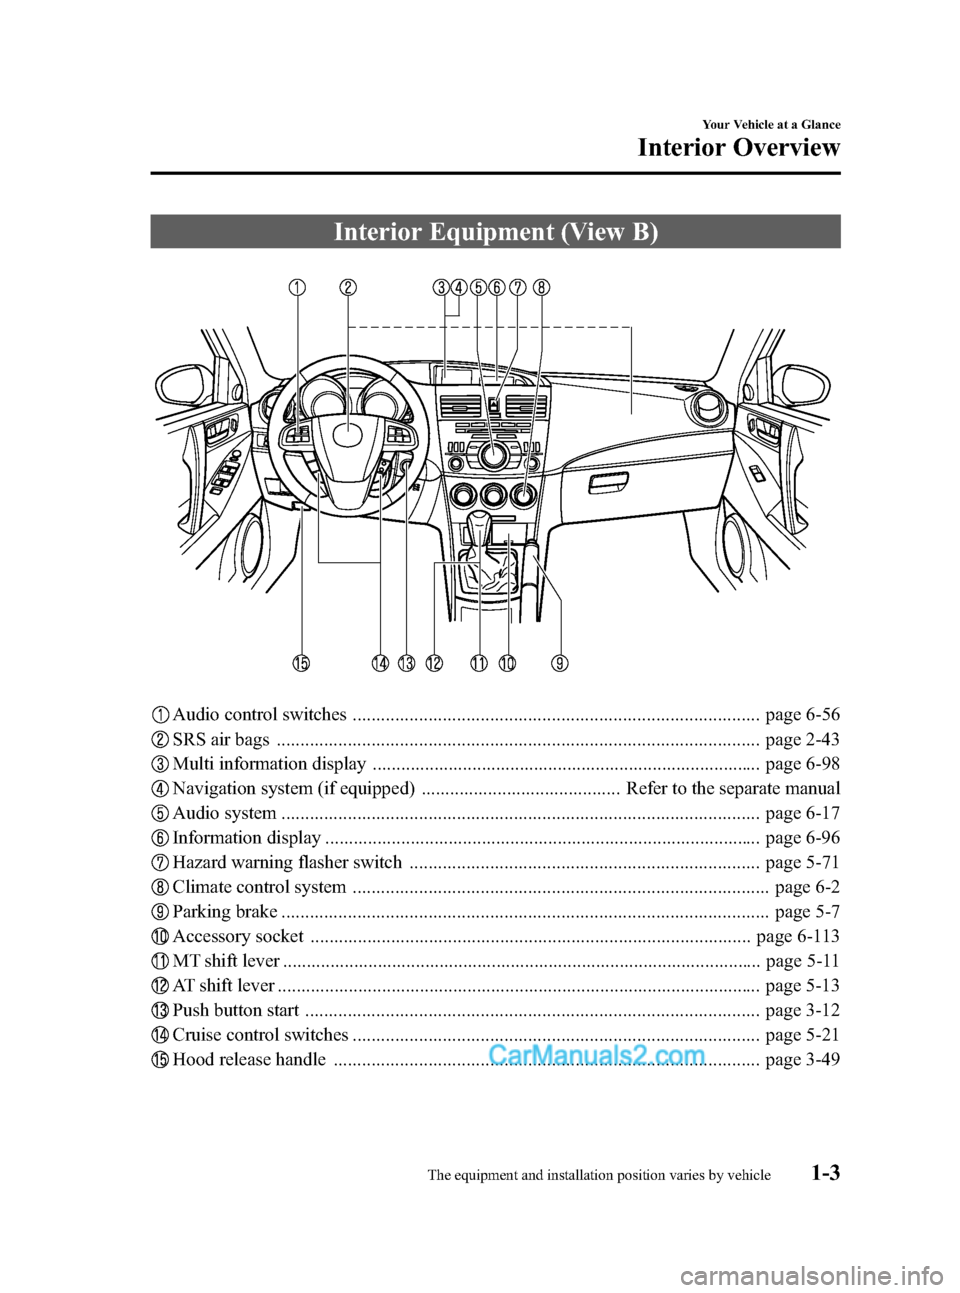 MAZDA MODEL MAZDASPEED 3 2011  Owners Manual (in English) Black plate (9,1)
Interior Equipment (View B)
Audio control switches ...................................................................................... page 6-56
SRS air bags .....................